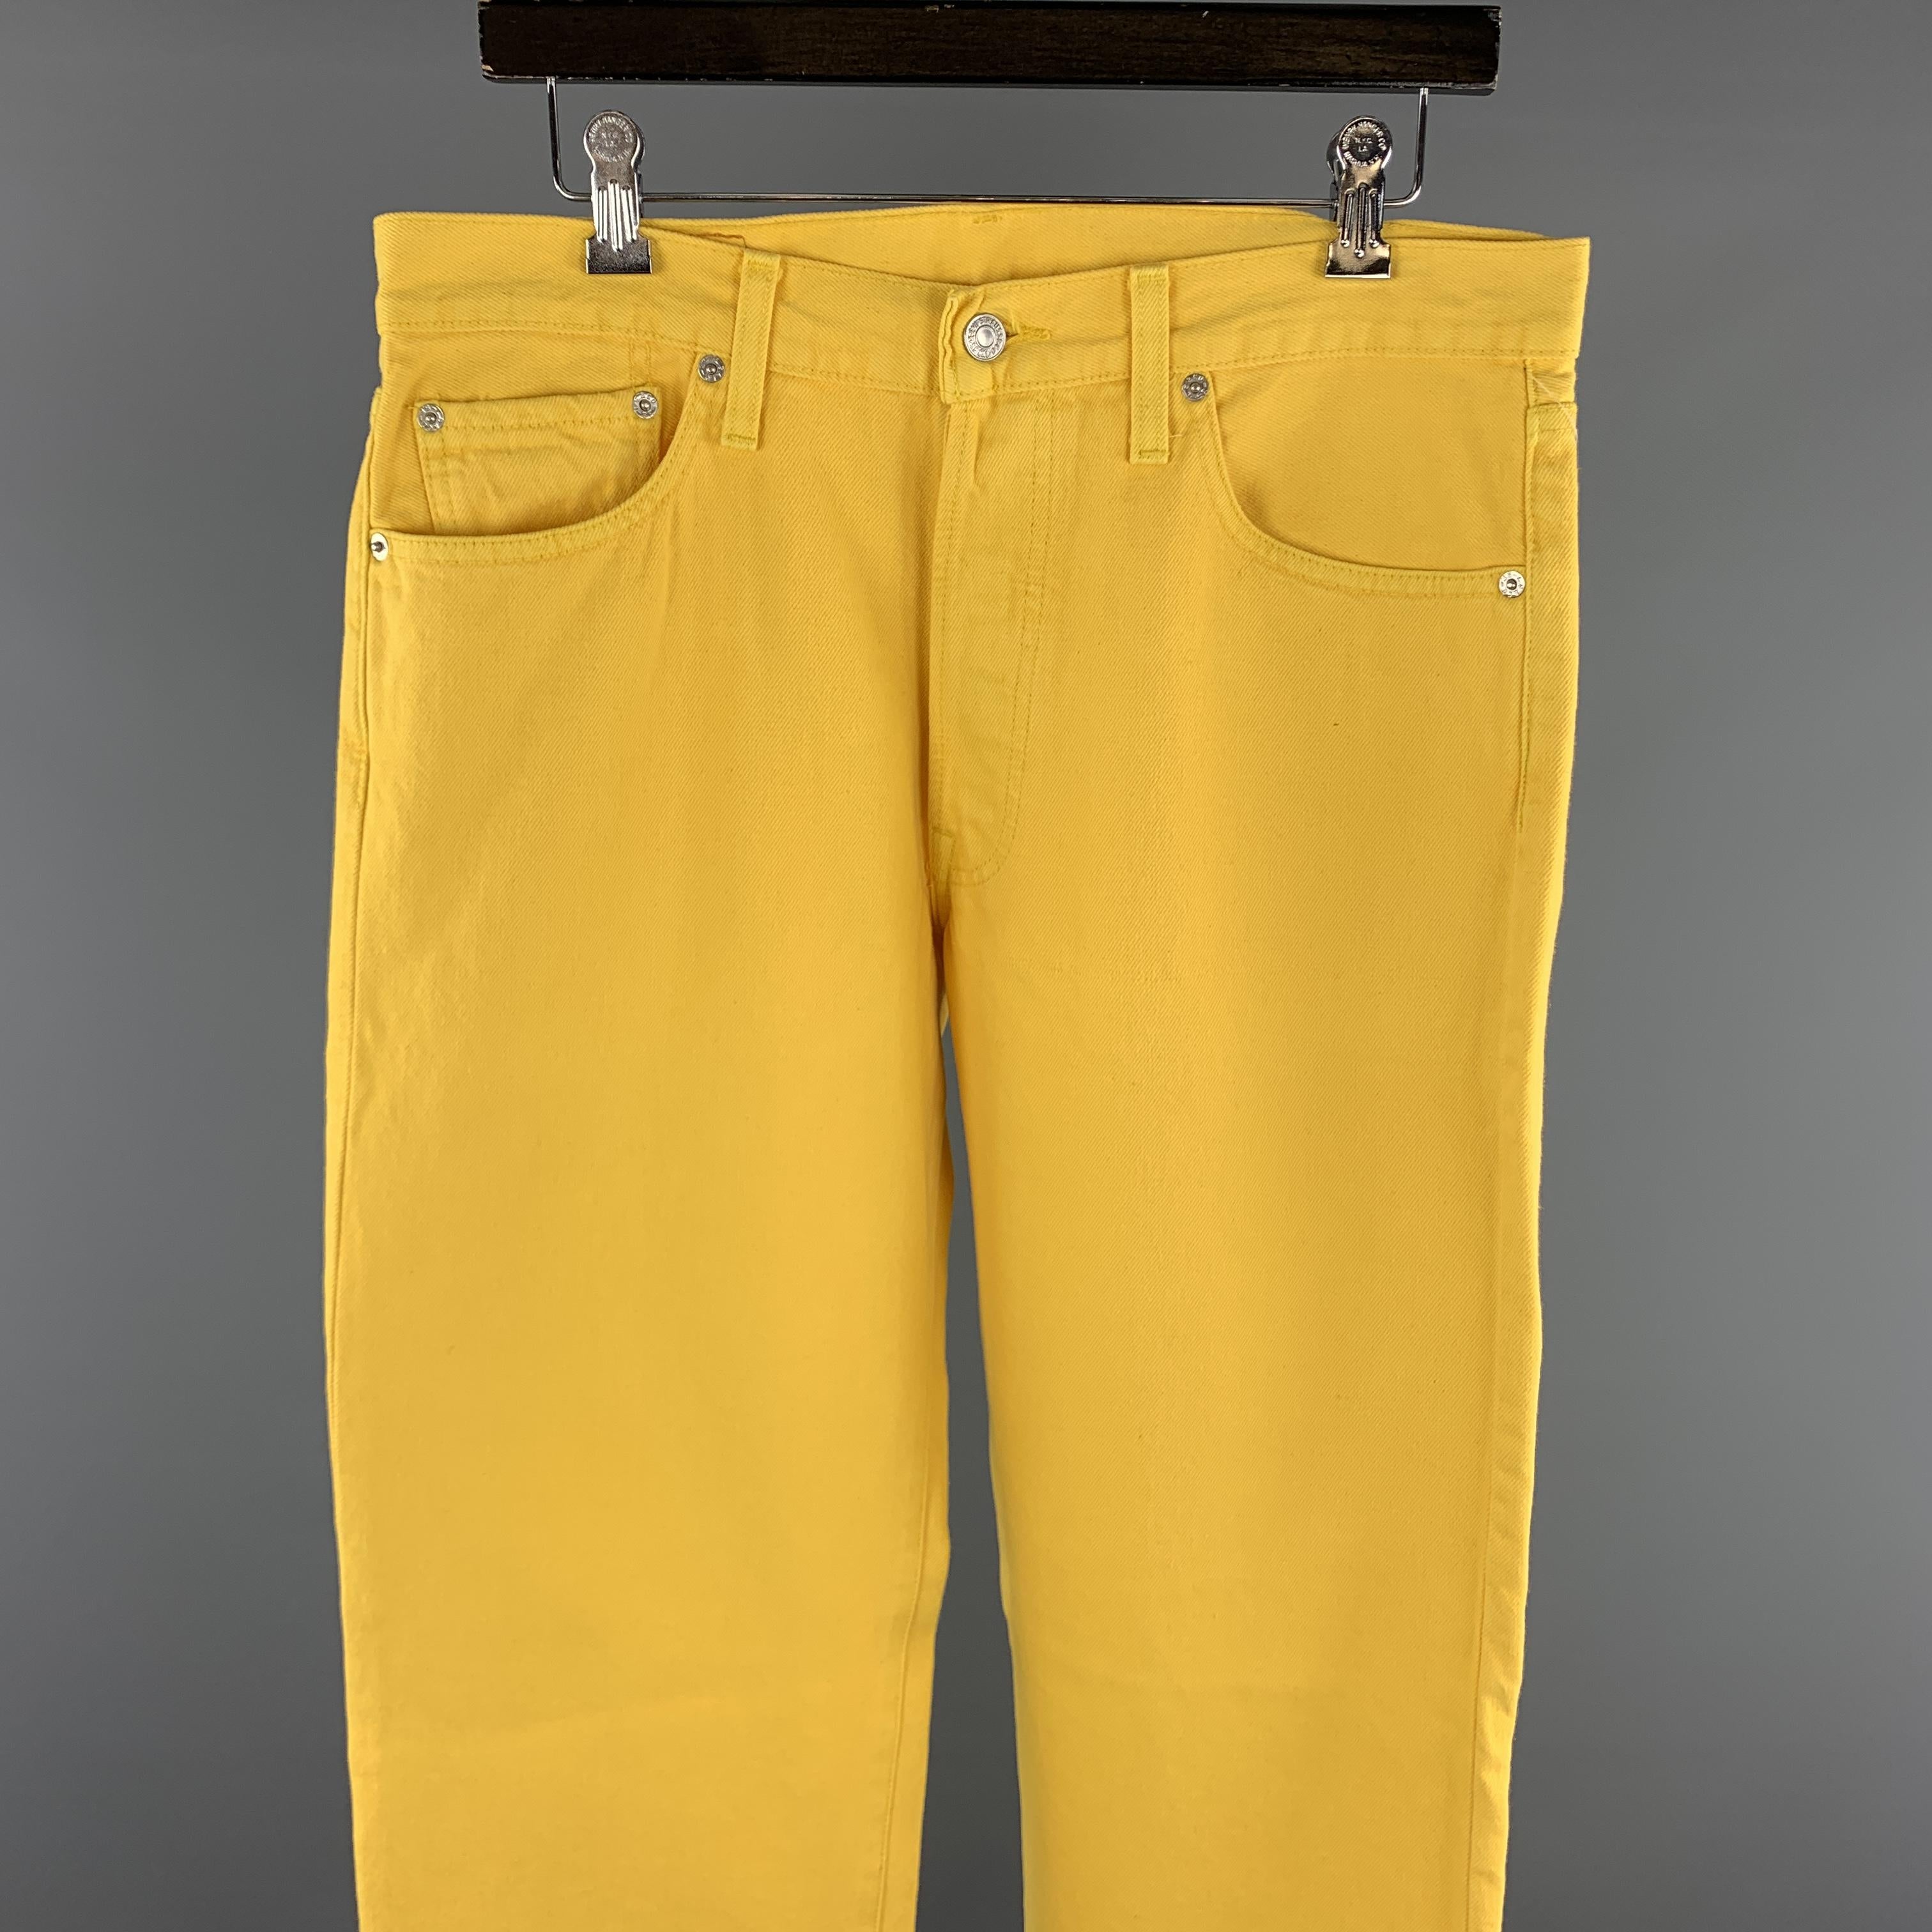 LEVI'S x 501 XX ALIFE casual pants comes in a yellow cotton featuring a jean cut style and a button fly closure. 


Very Good Pre-Owned Condition.
Marked: 34 x 32

Measurements:

Waist: 42 in. 
Rise: 9.5 in.
Inseam: 32 in.